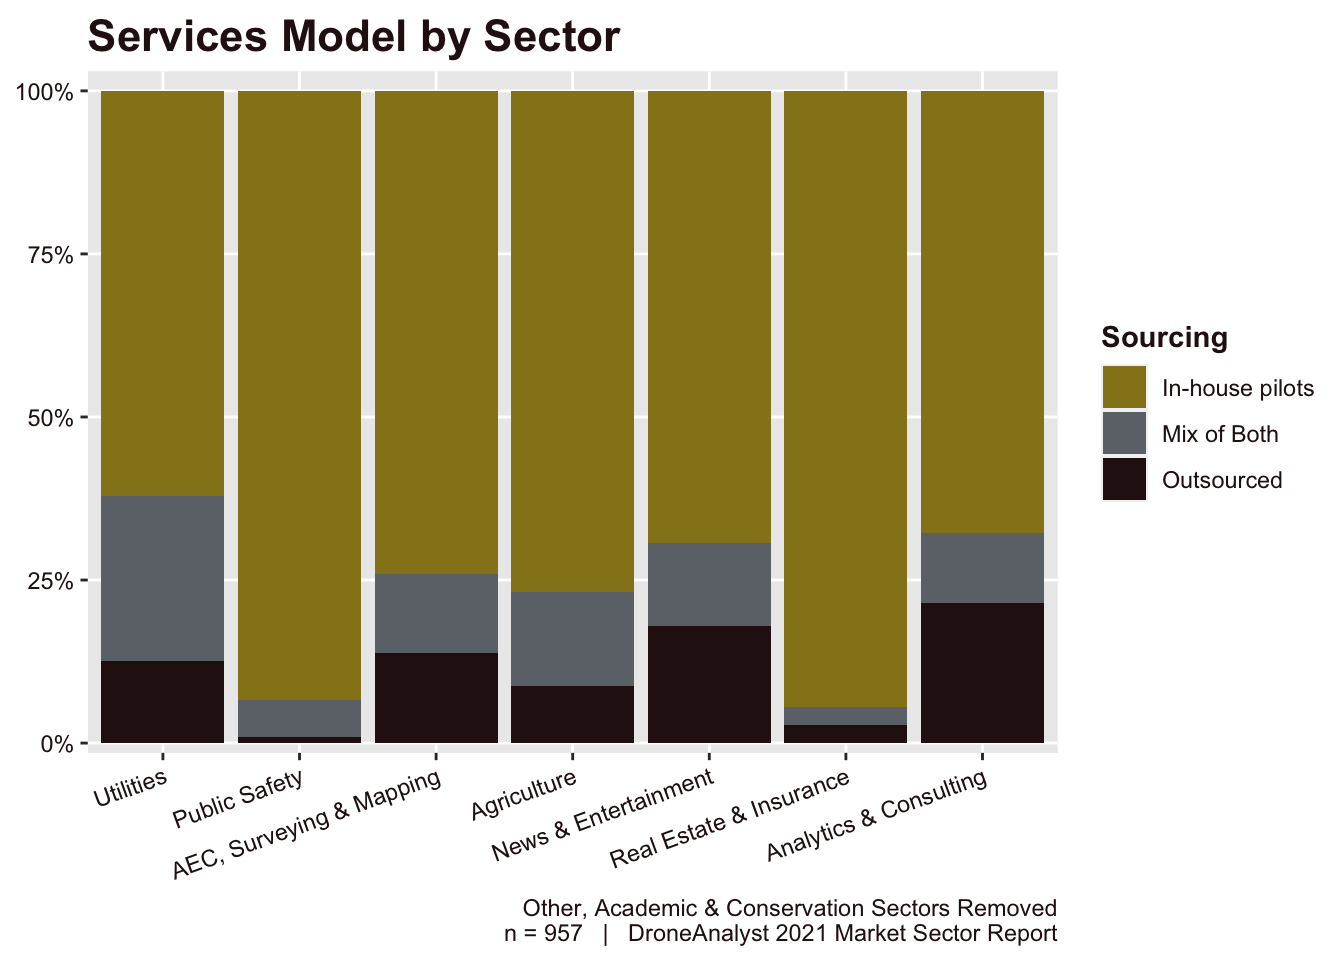 Services Model by Sector